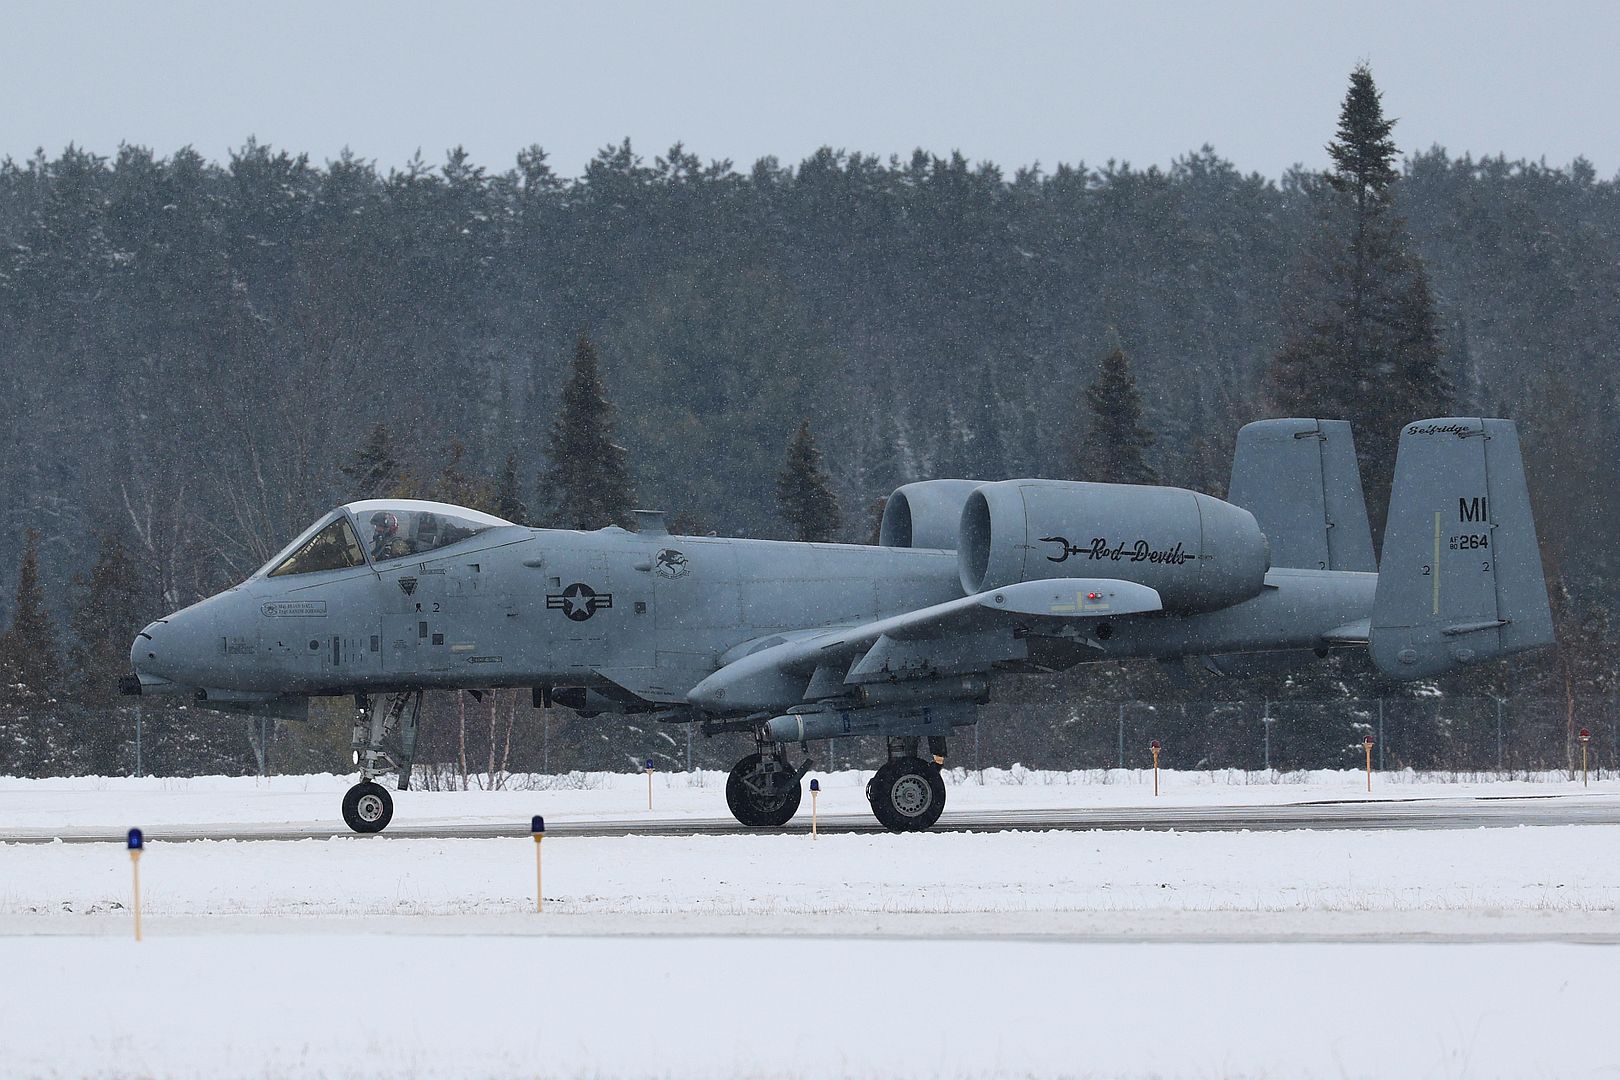 10 Thunderbolt II Aircraft From The 107th Fighter Squadron At Selfridge Air National Guard Base Michigan